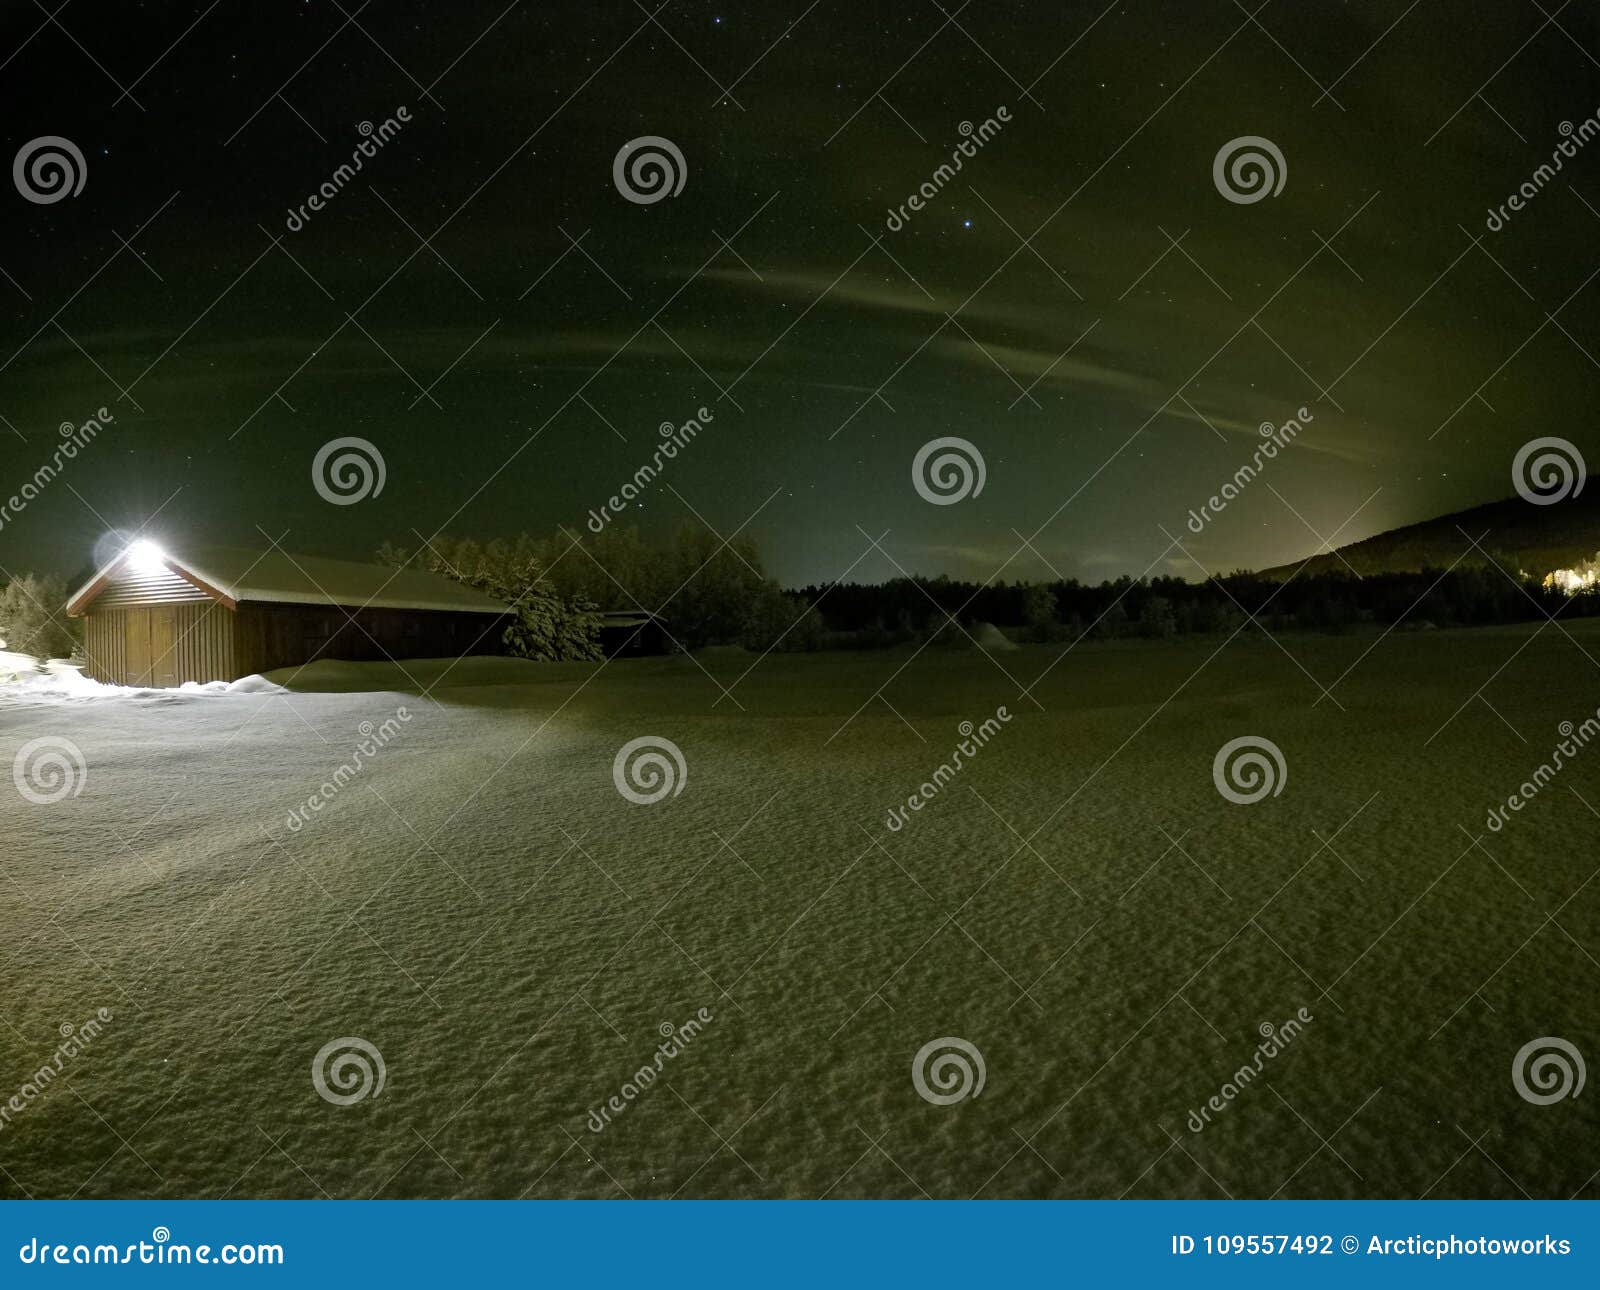 long snowy field at night with barn and ligh